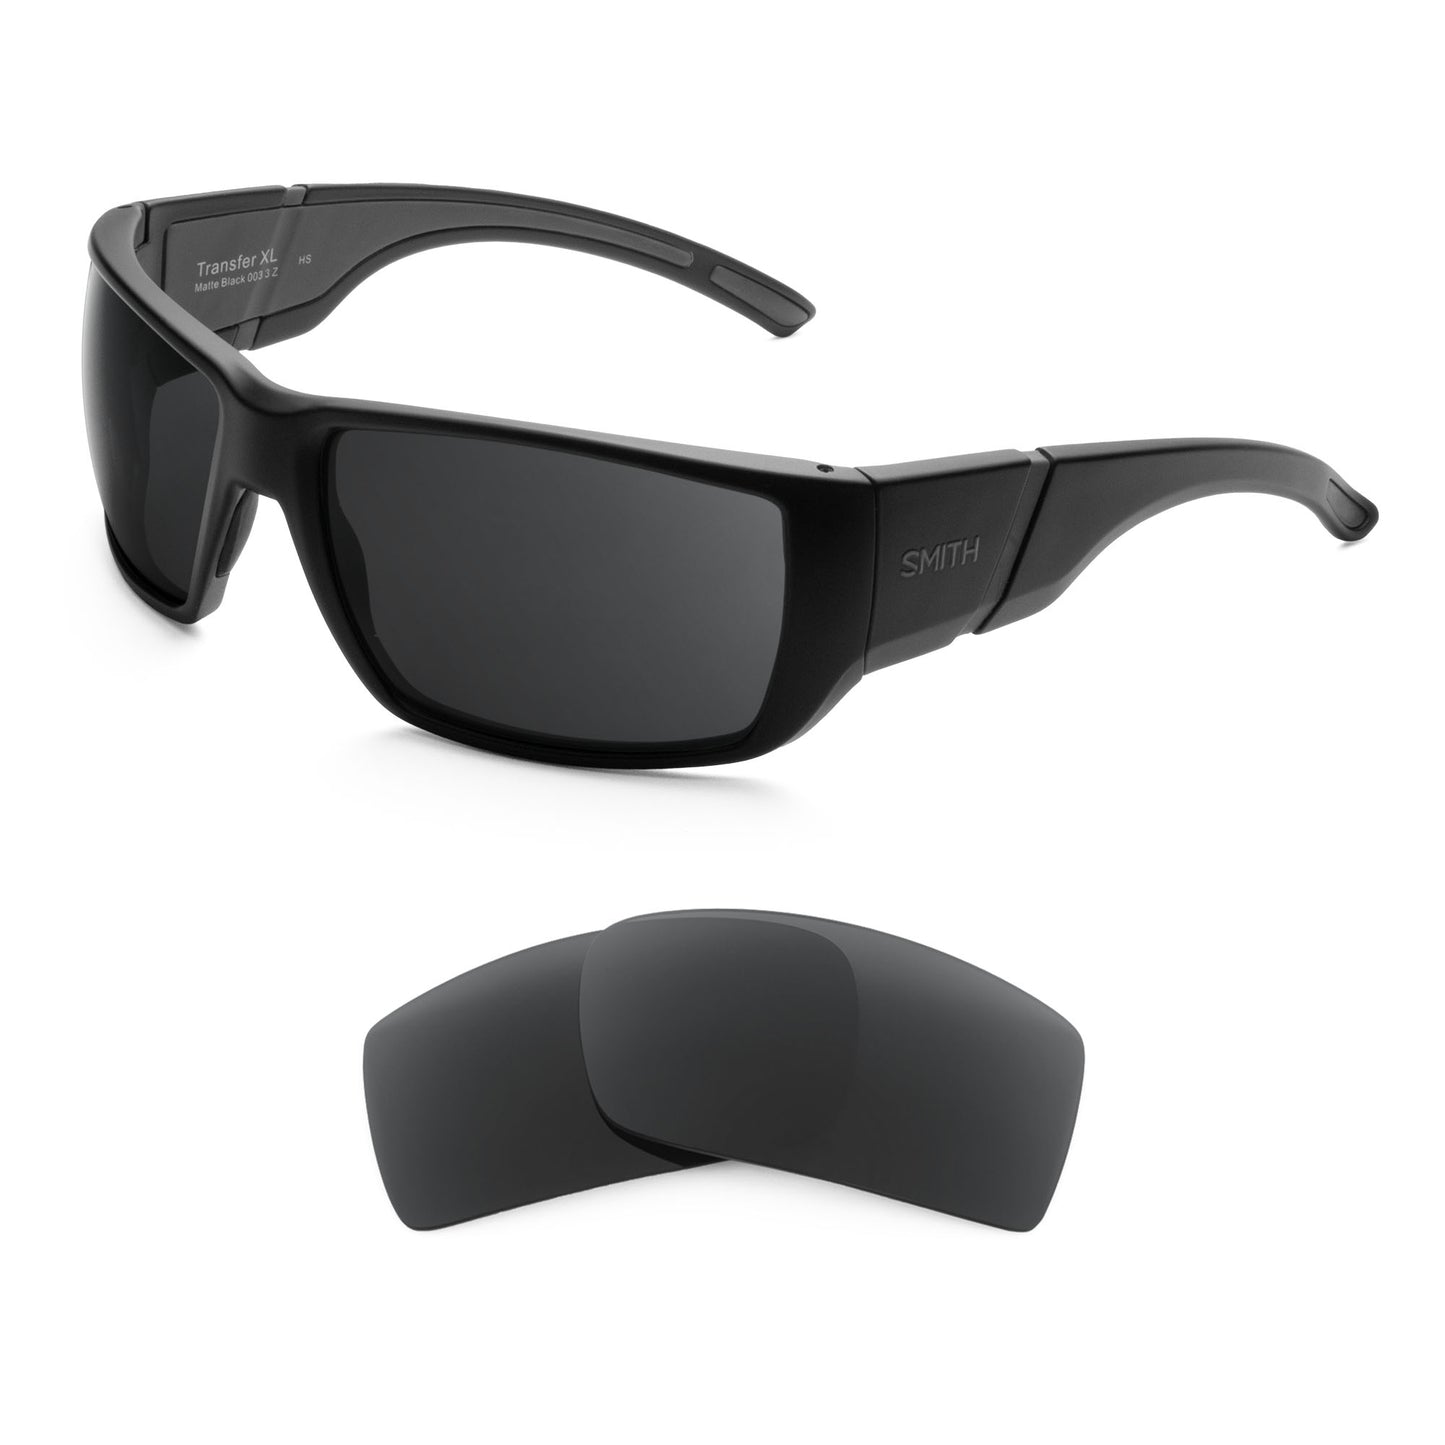 Smith Transfer XL sunglasses with replacement lenses